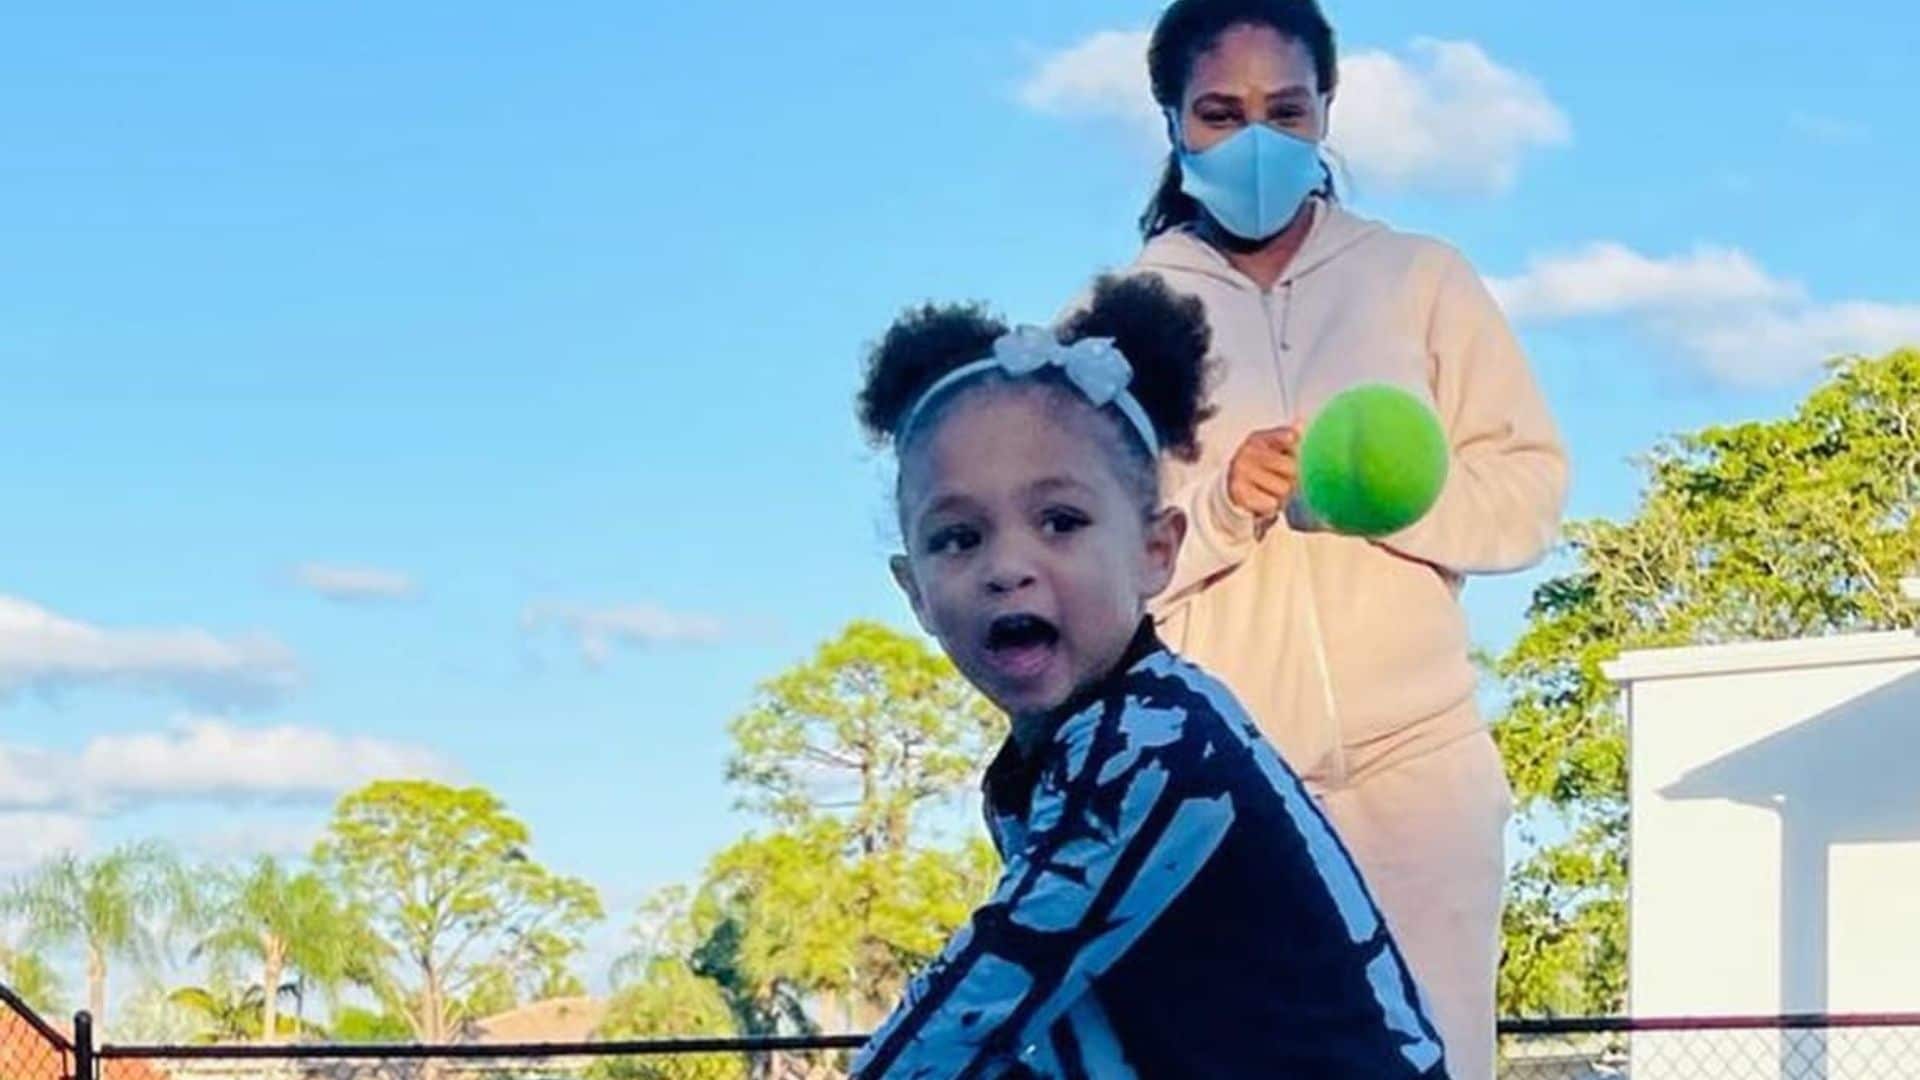 Serena Williams shares adorable photo of daughter Olympia’s tennis lesson